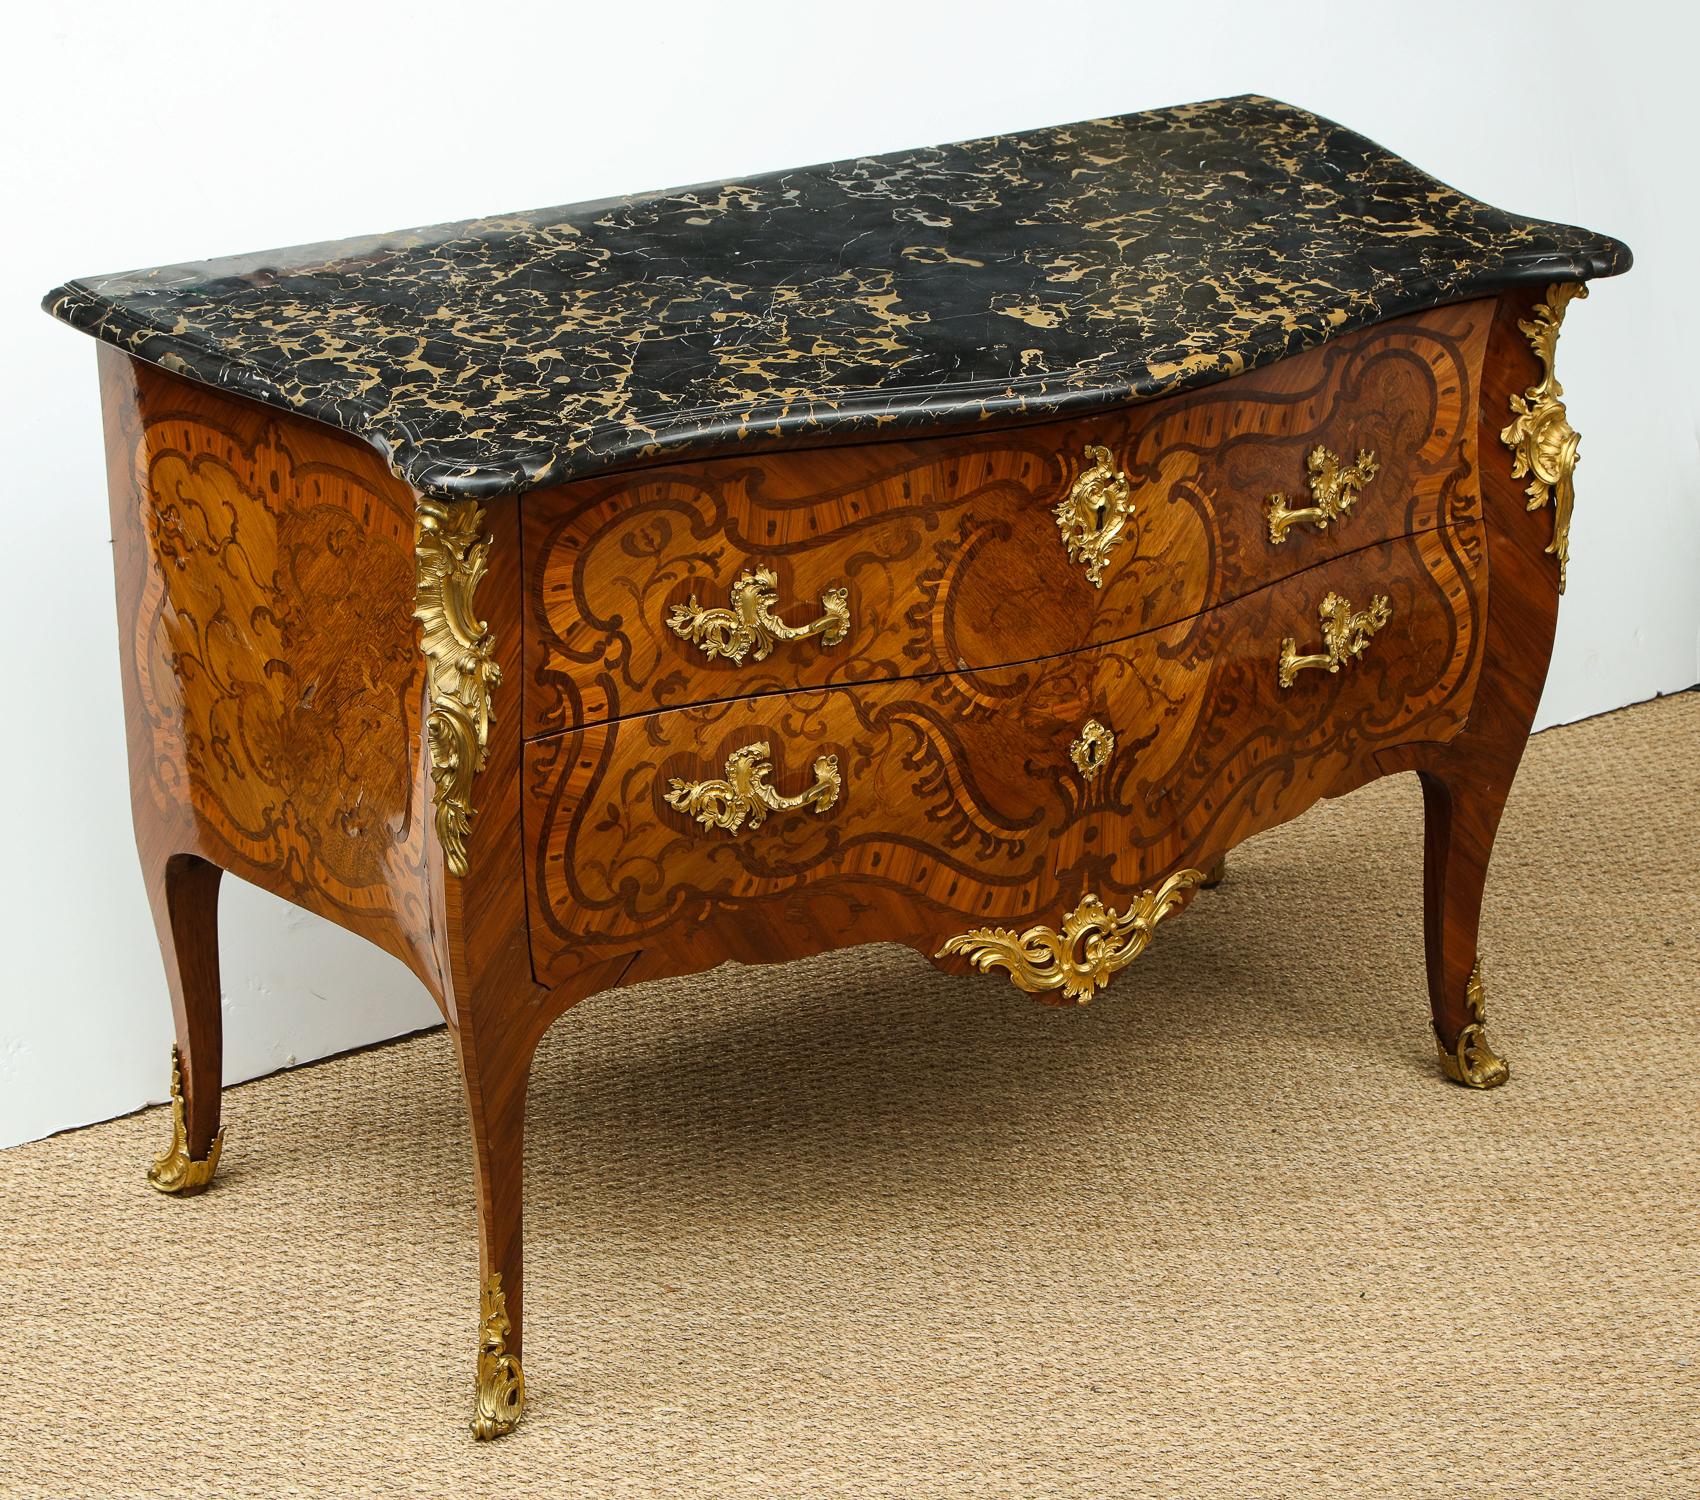 Important Louis XV inlaid kingwood commode by Pierre II Migeon, circa 1745, having original shaped and molded Porto marble top over two drawers having high style rocaille inlay and original gilt bronze mounts,
 
Important Louis XV ormolu-mounted